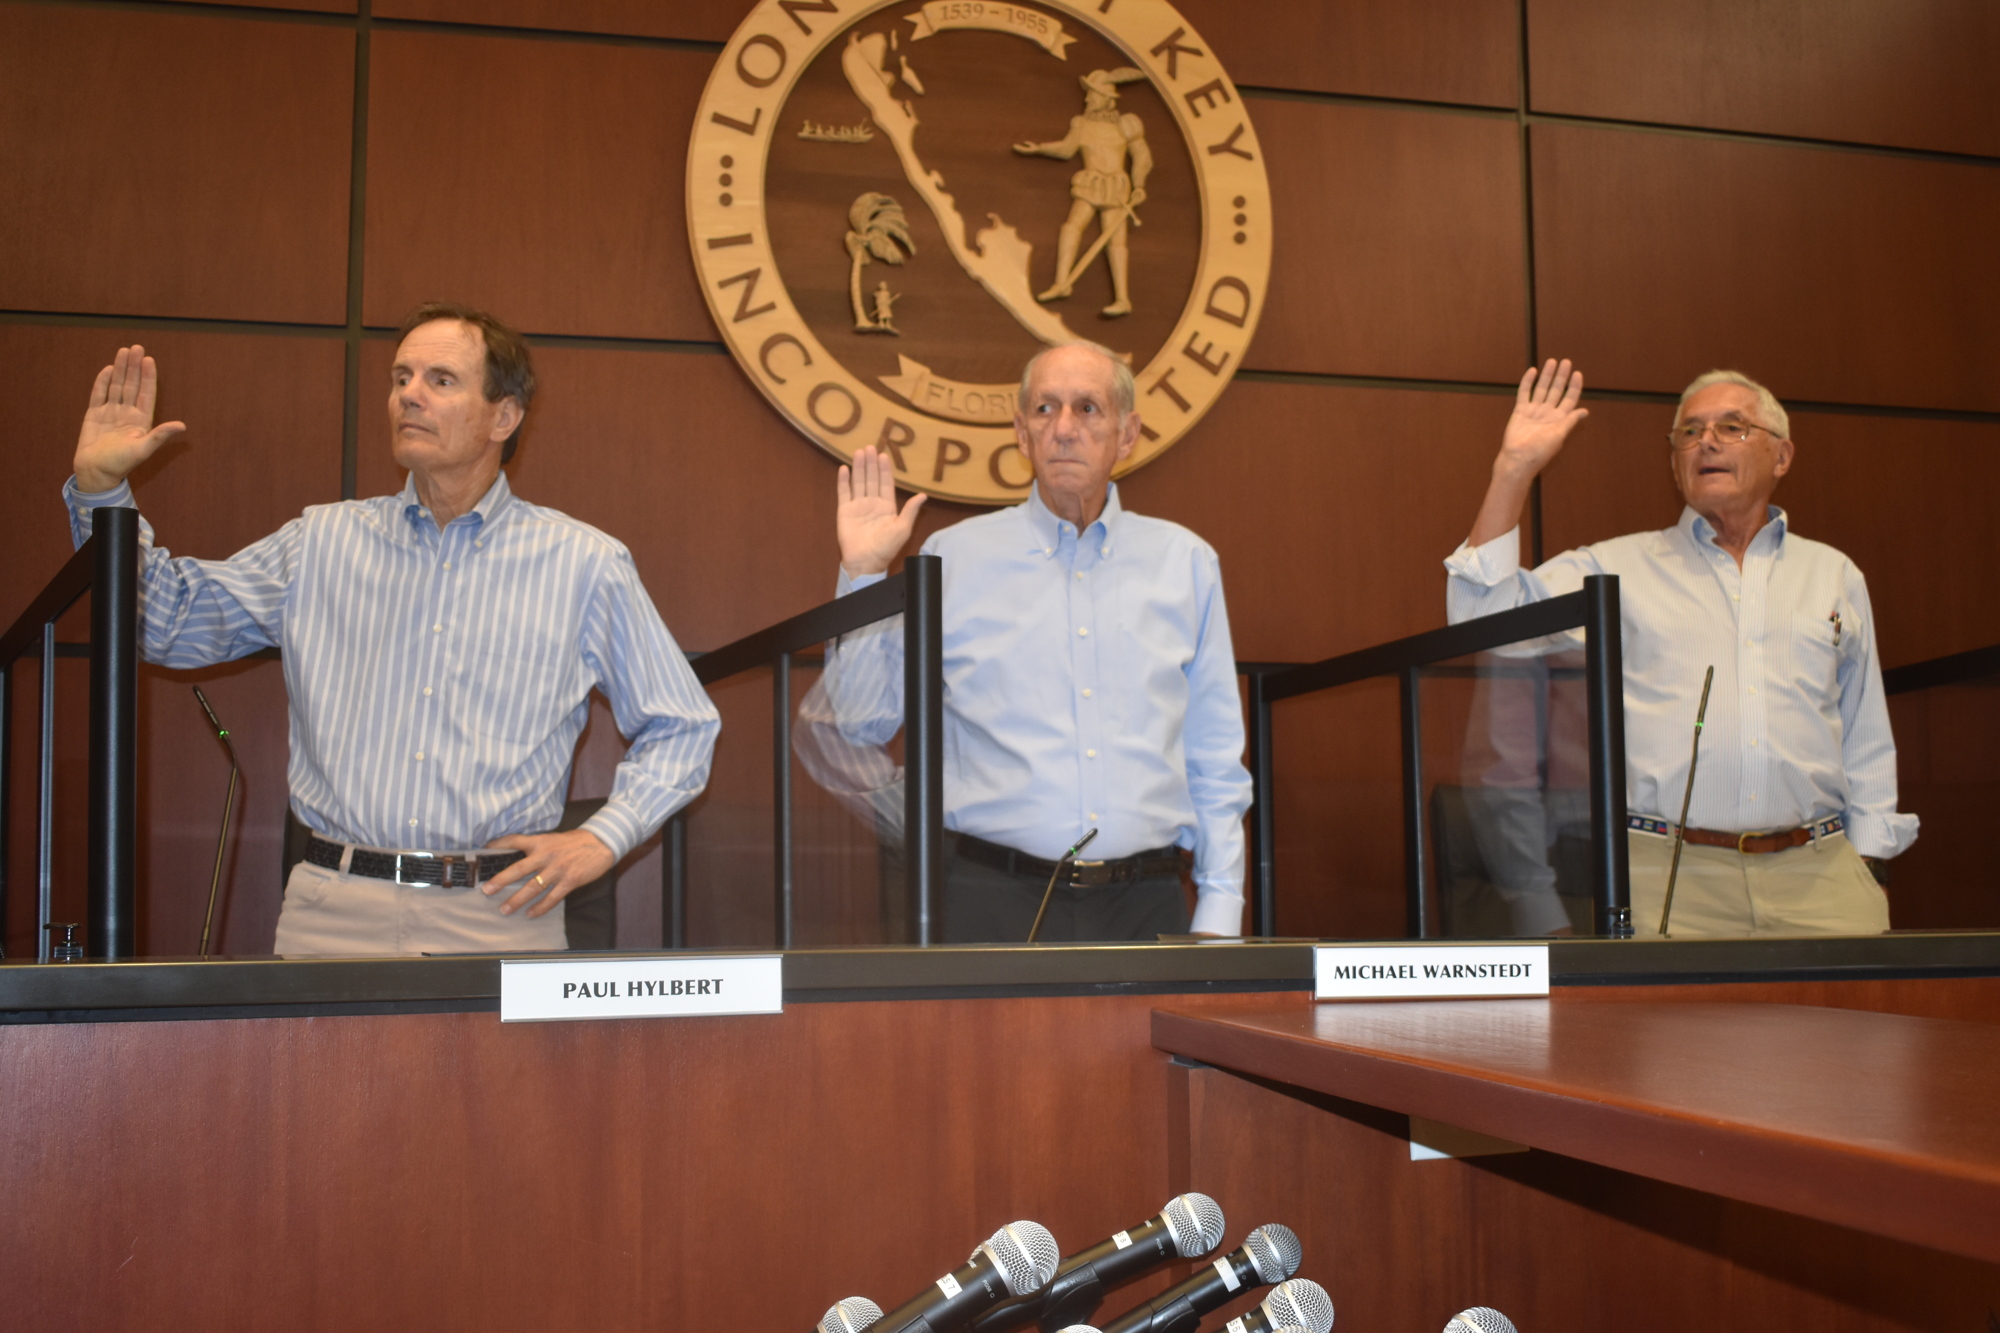 Paul Hylbert, Michael Warnstedt and Jay Plager are sworn in as members of the Longboat Key Planning and Zoning Board.